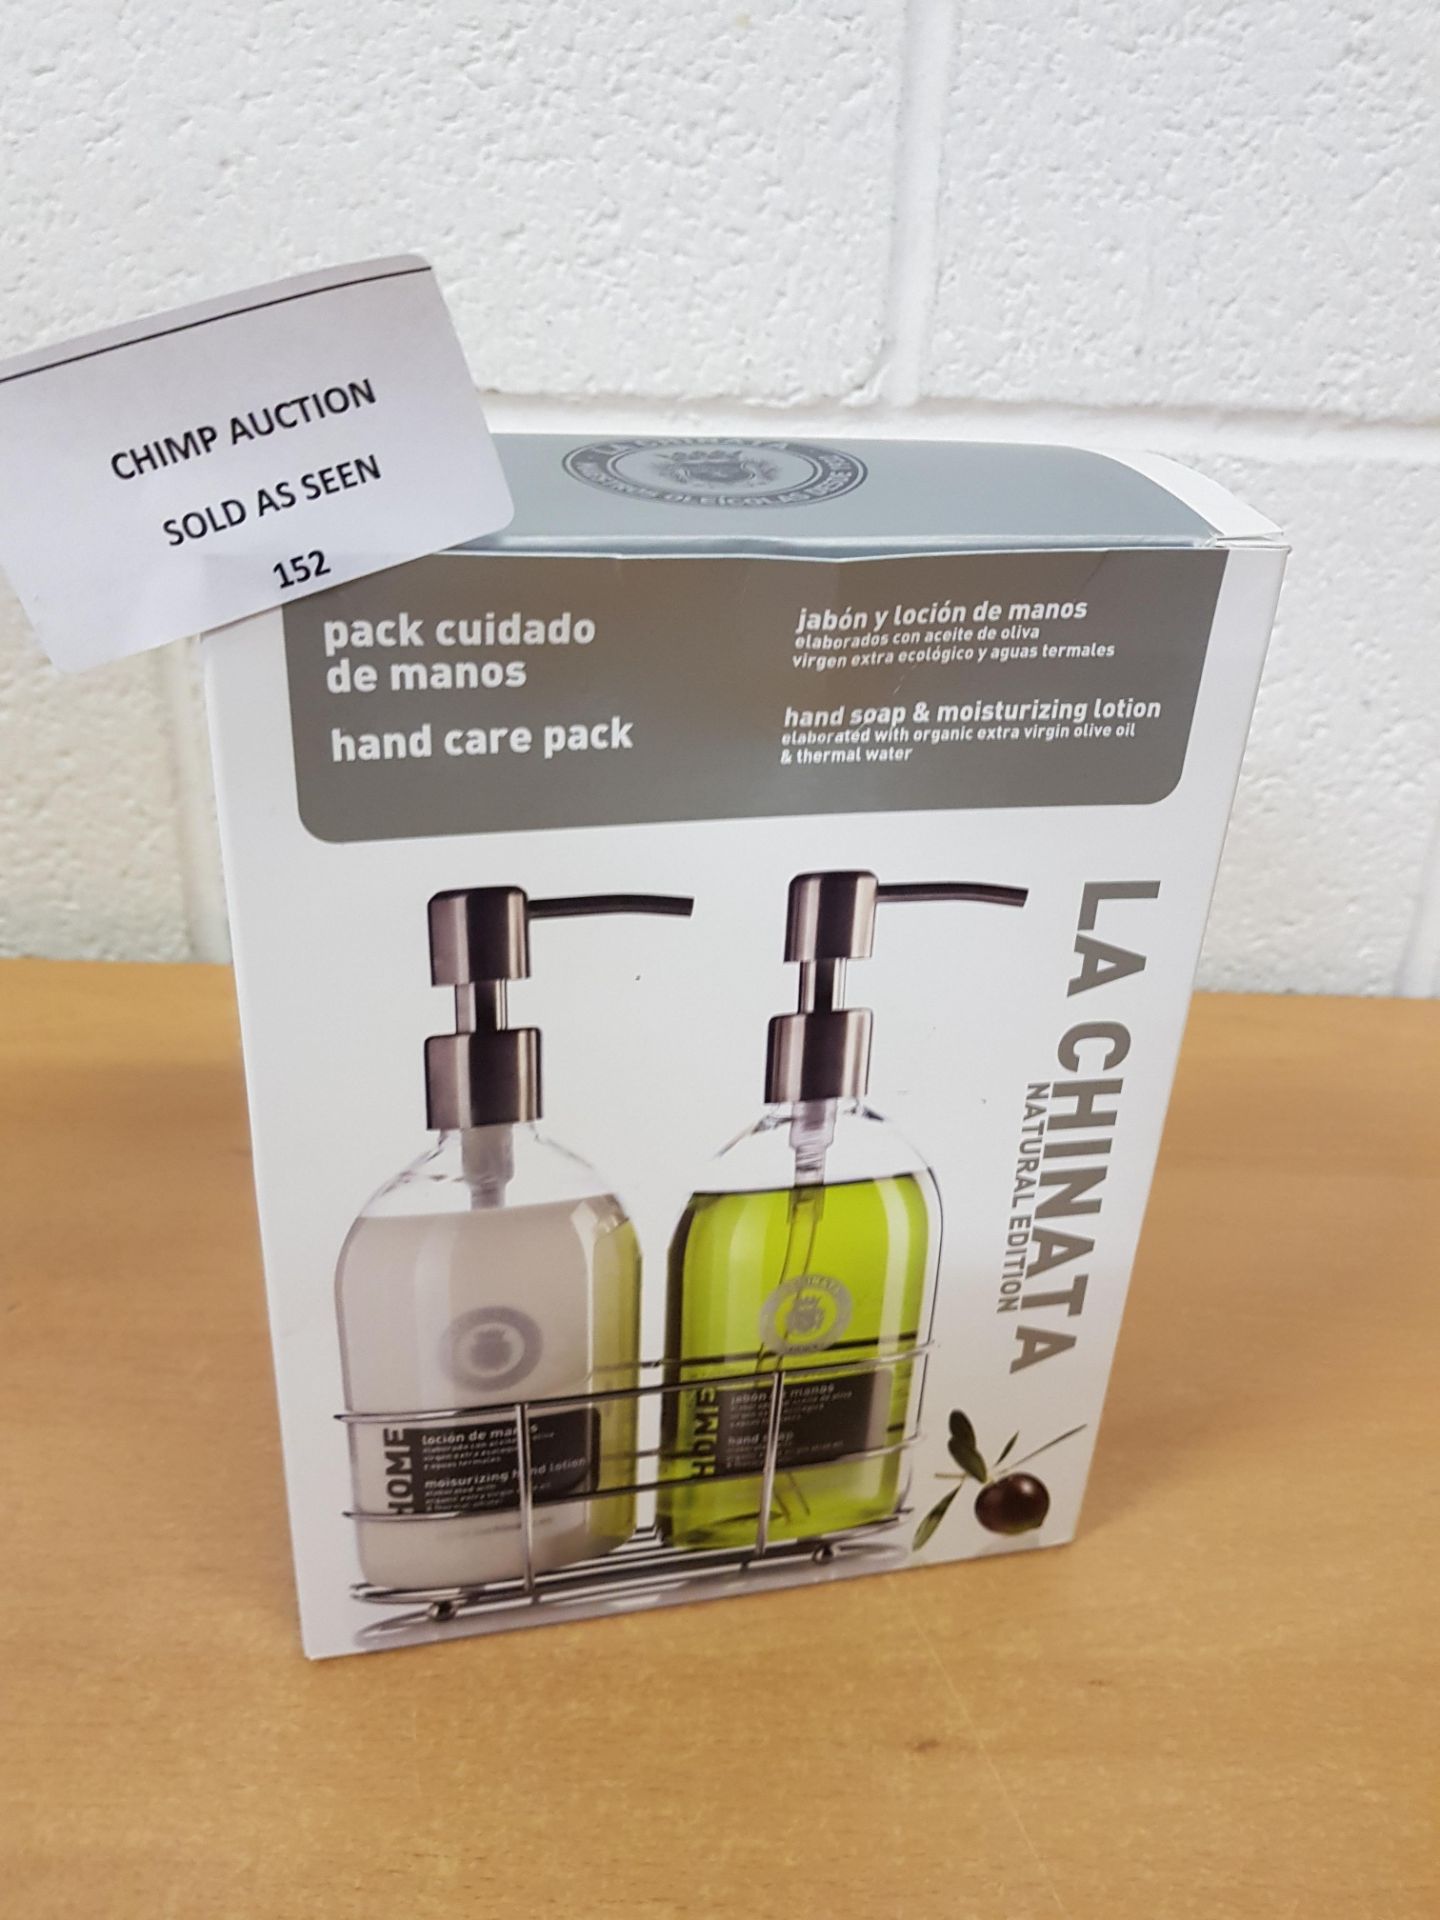 Brand new Natural Edition Hand wash care pack by La Chinata